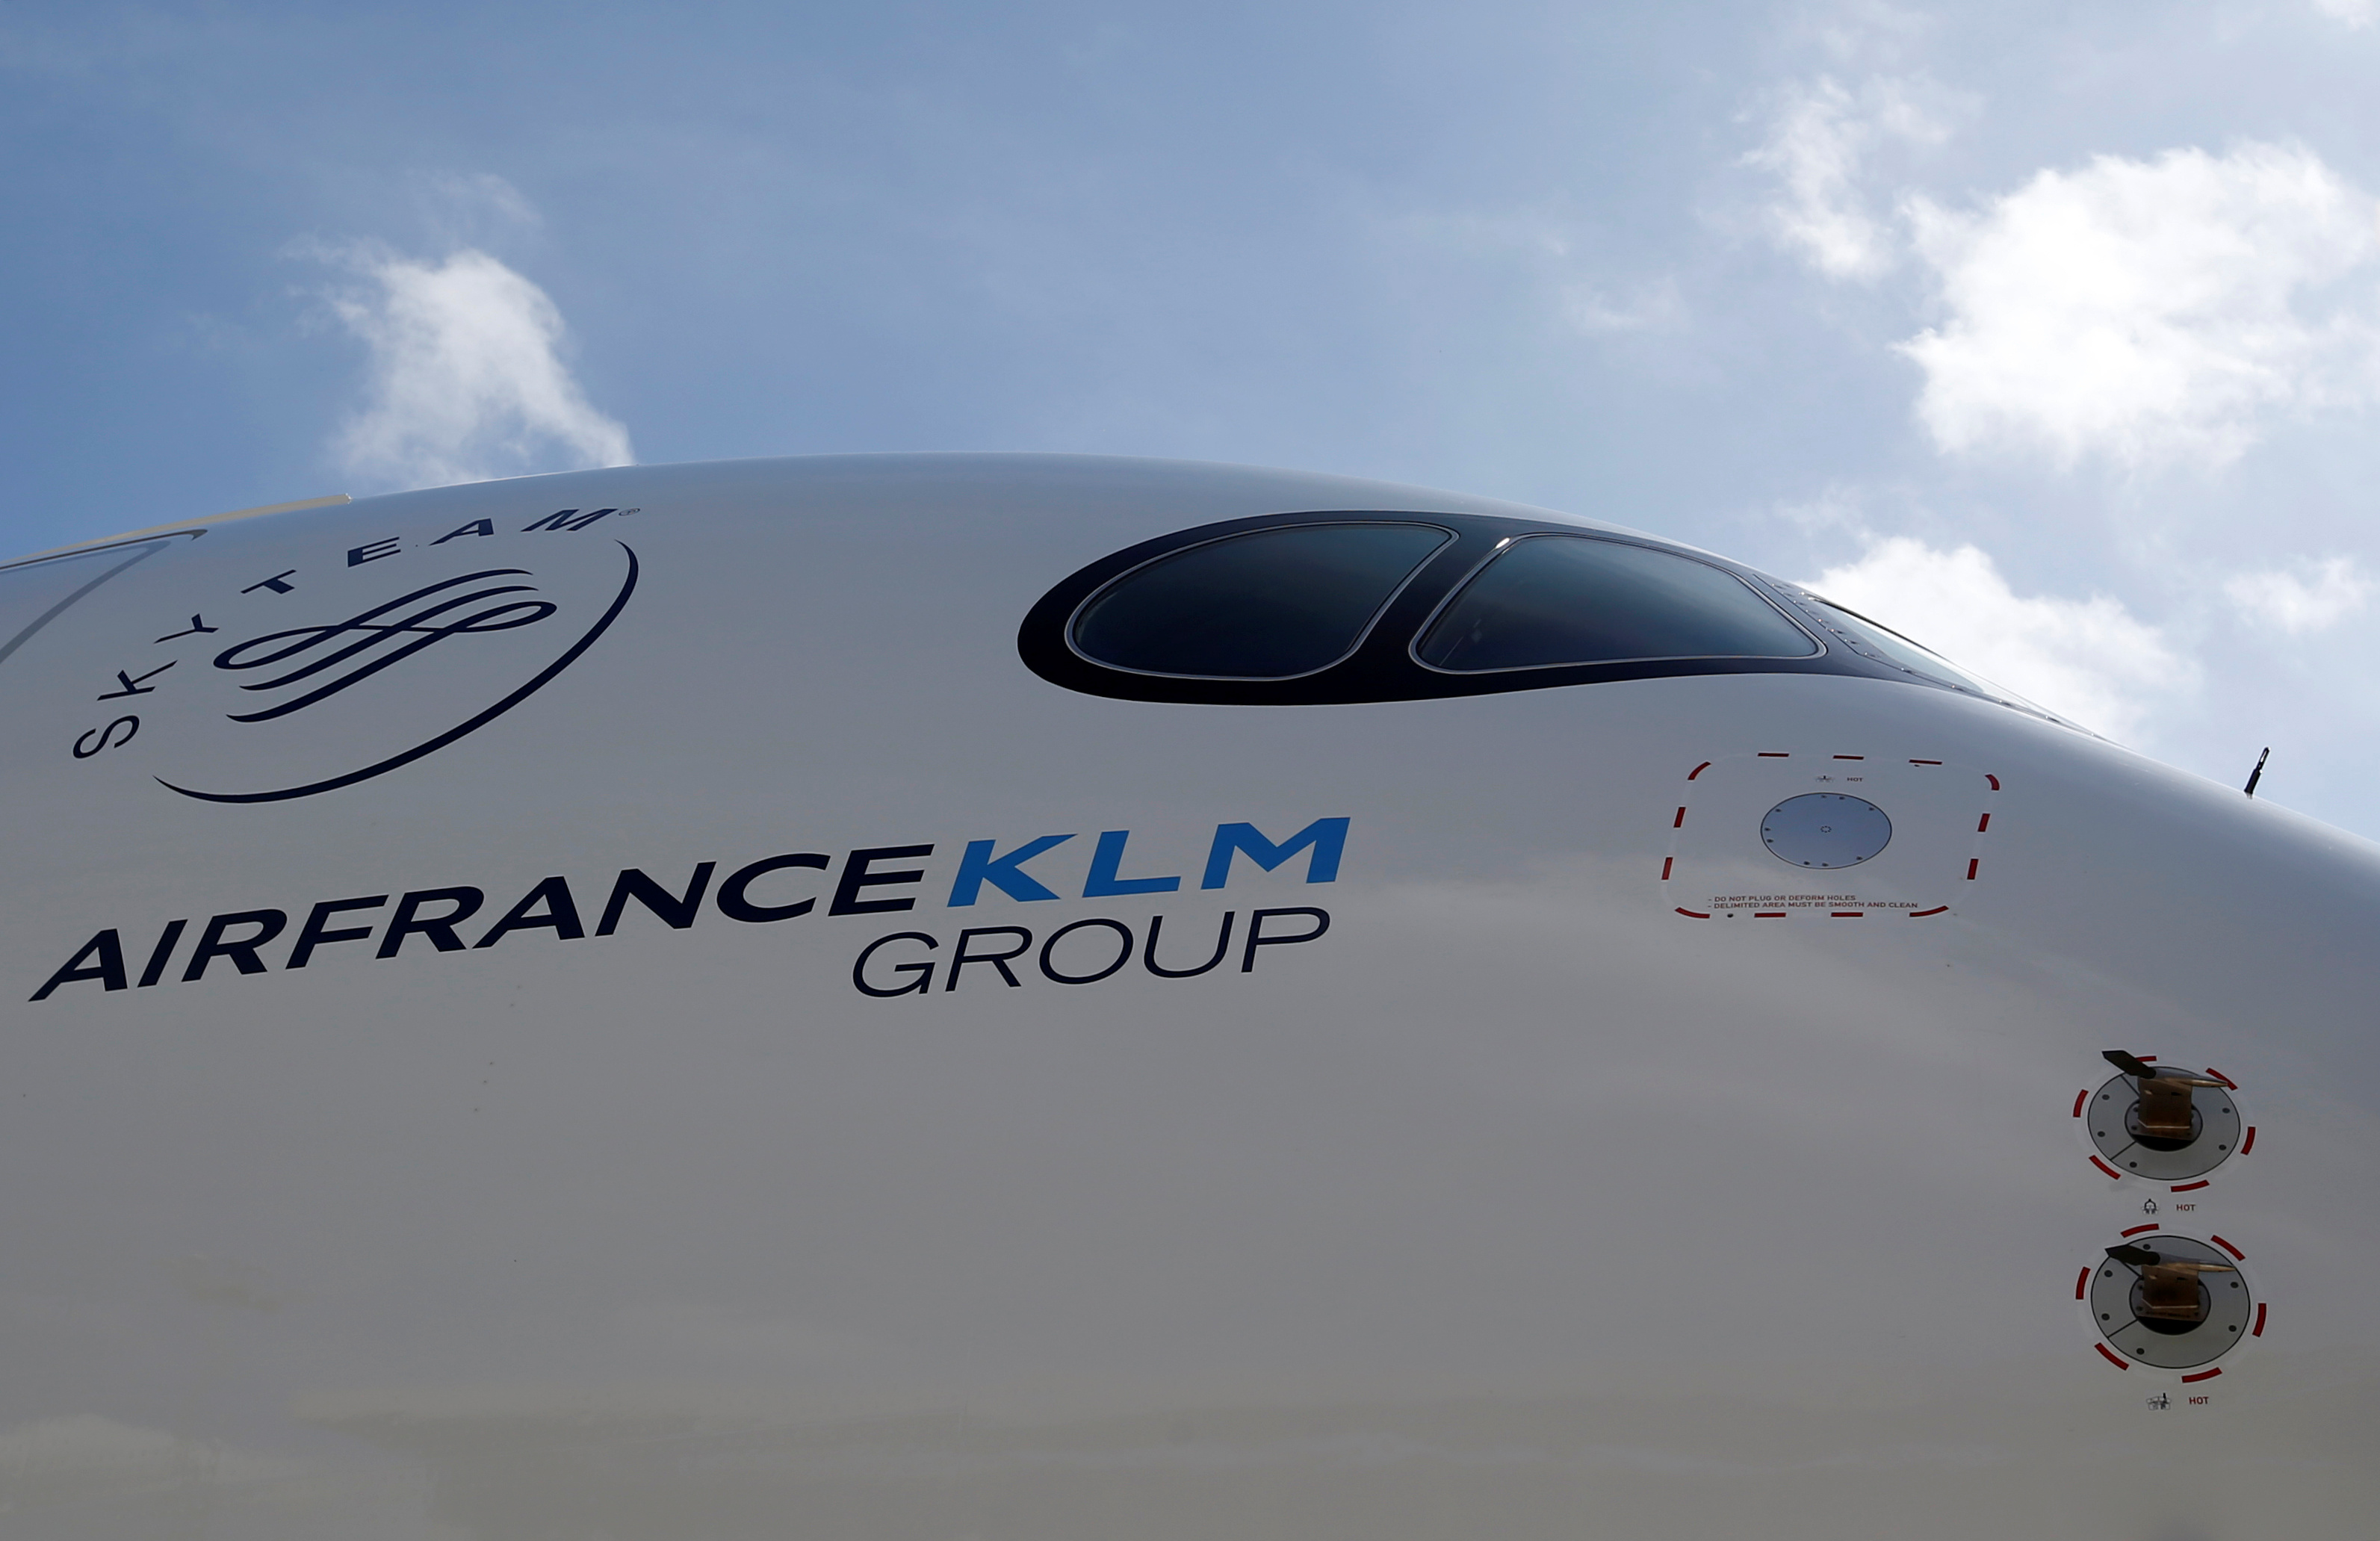 Logo of Air France KLM Group is pictured on the first Air France airliner's Airbus A350 during a ceremony at the aircraft builder's headquarters of Airbus in Colomiers